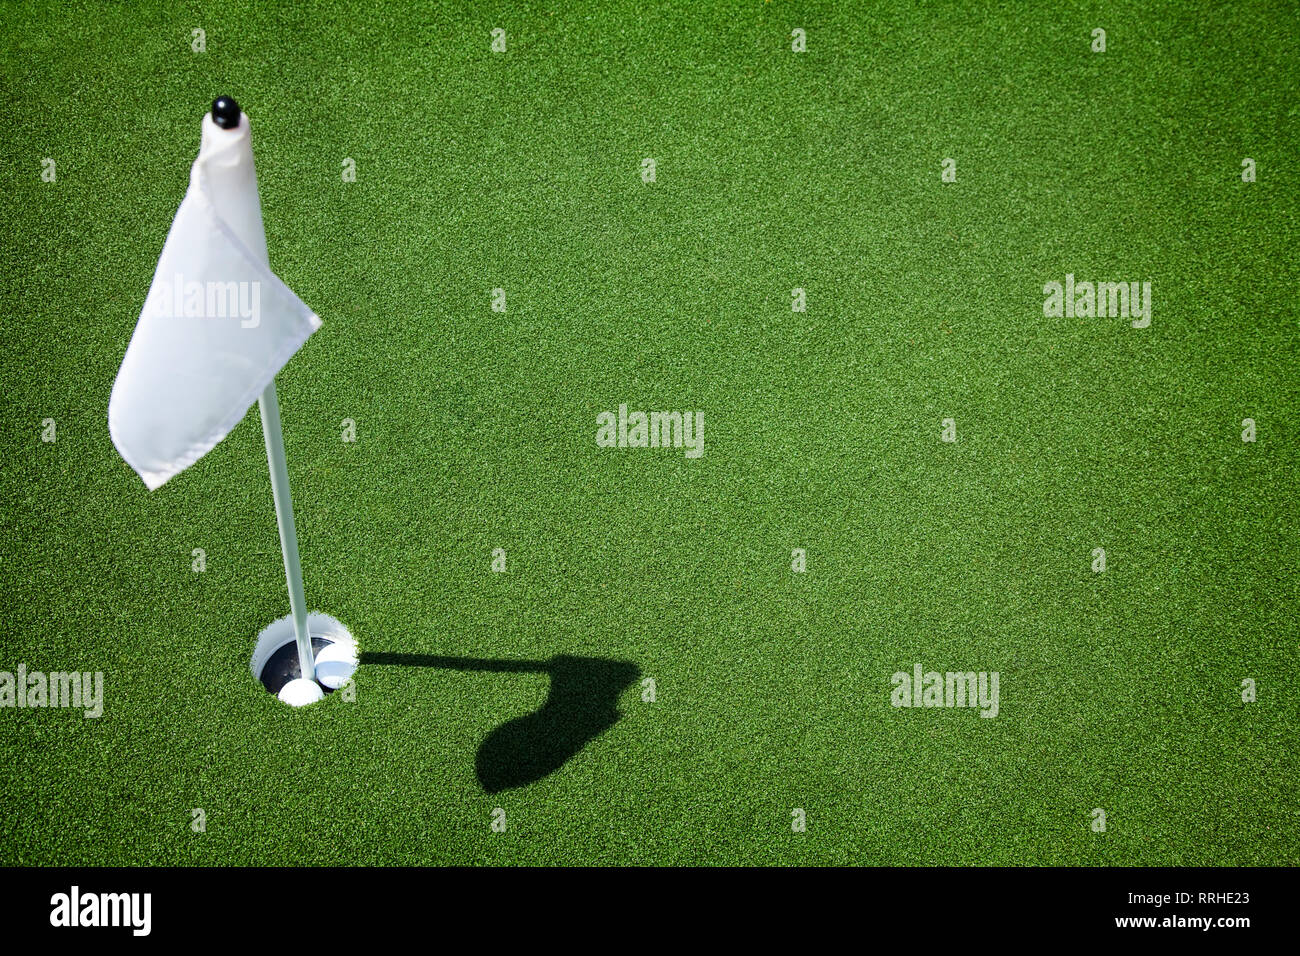 Two golf balls sit inside cup on golf course putting green with flag. Stock Photo